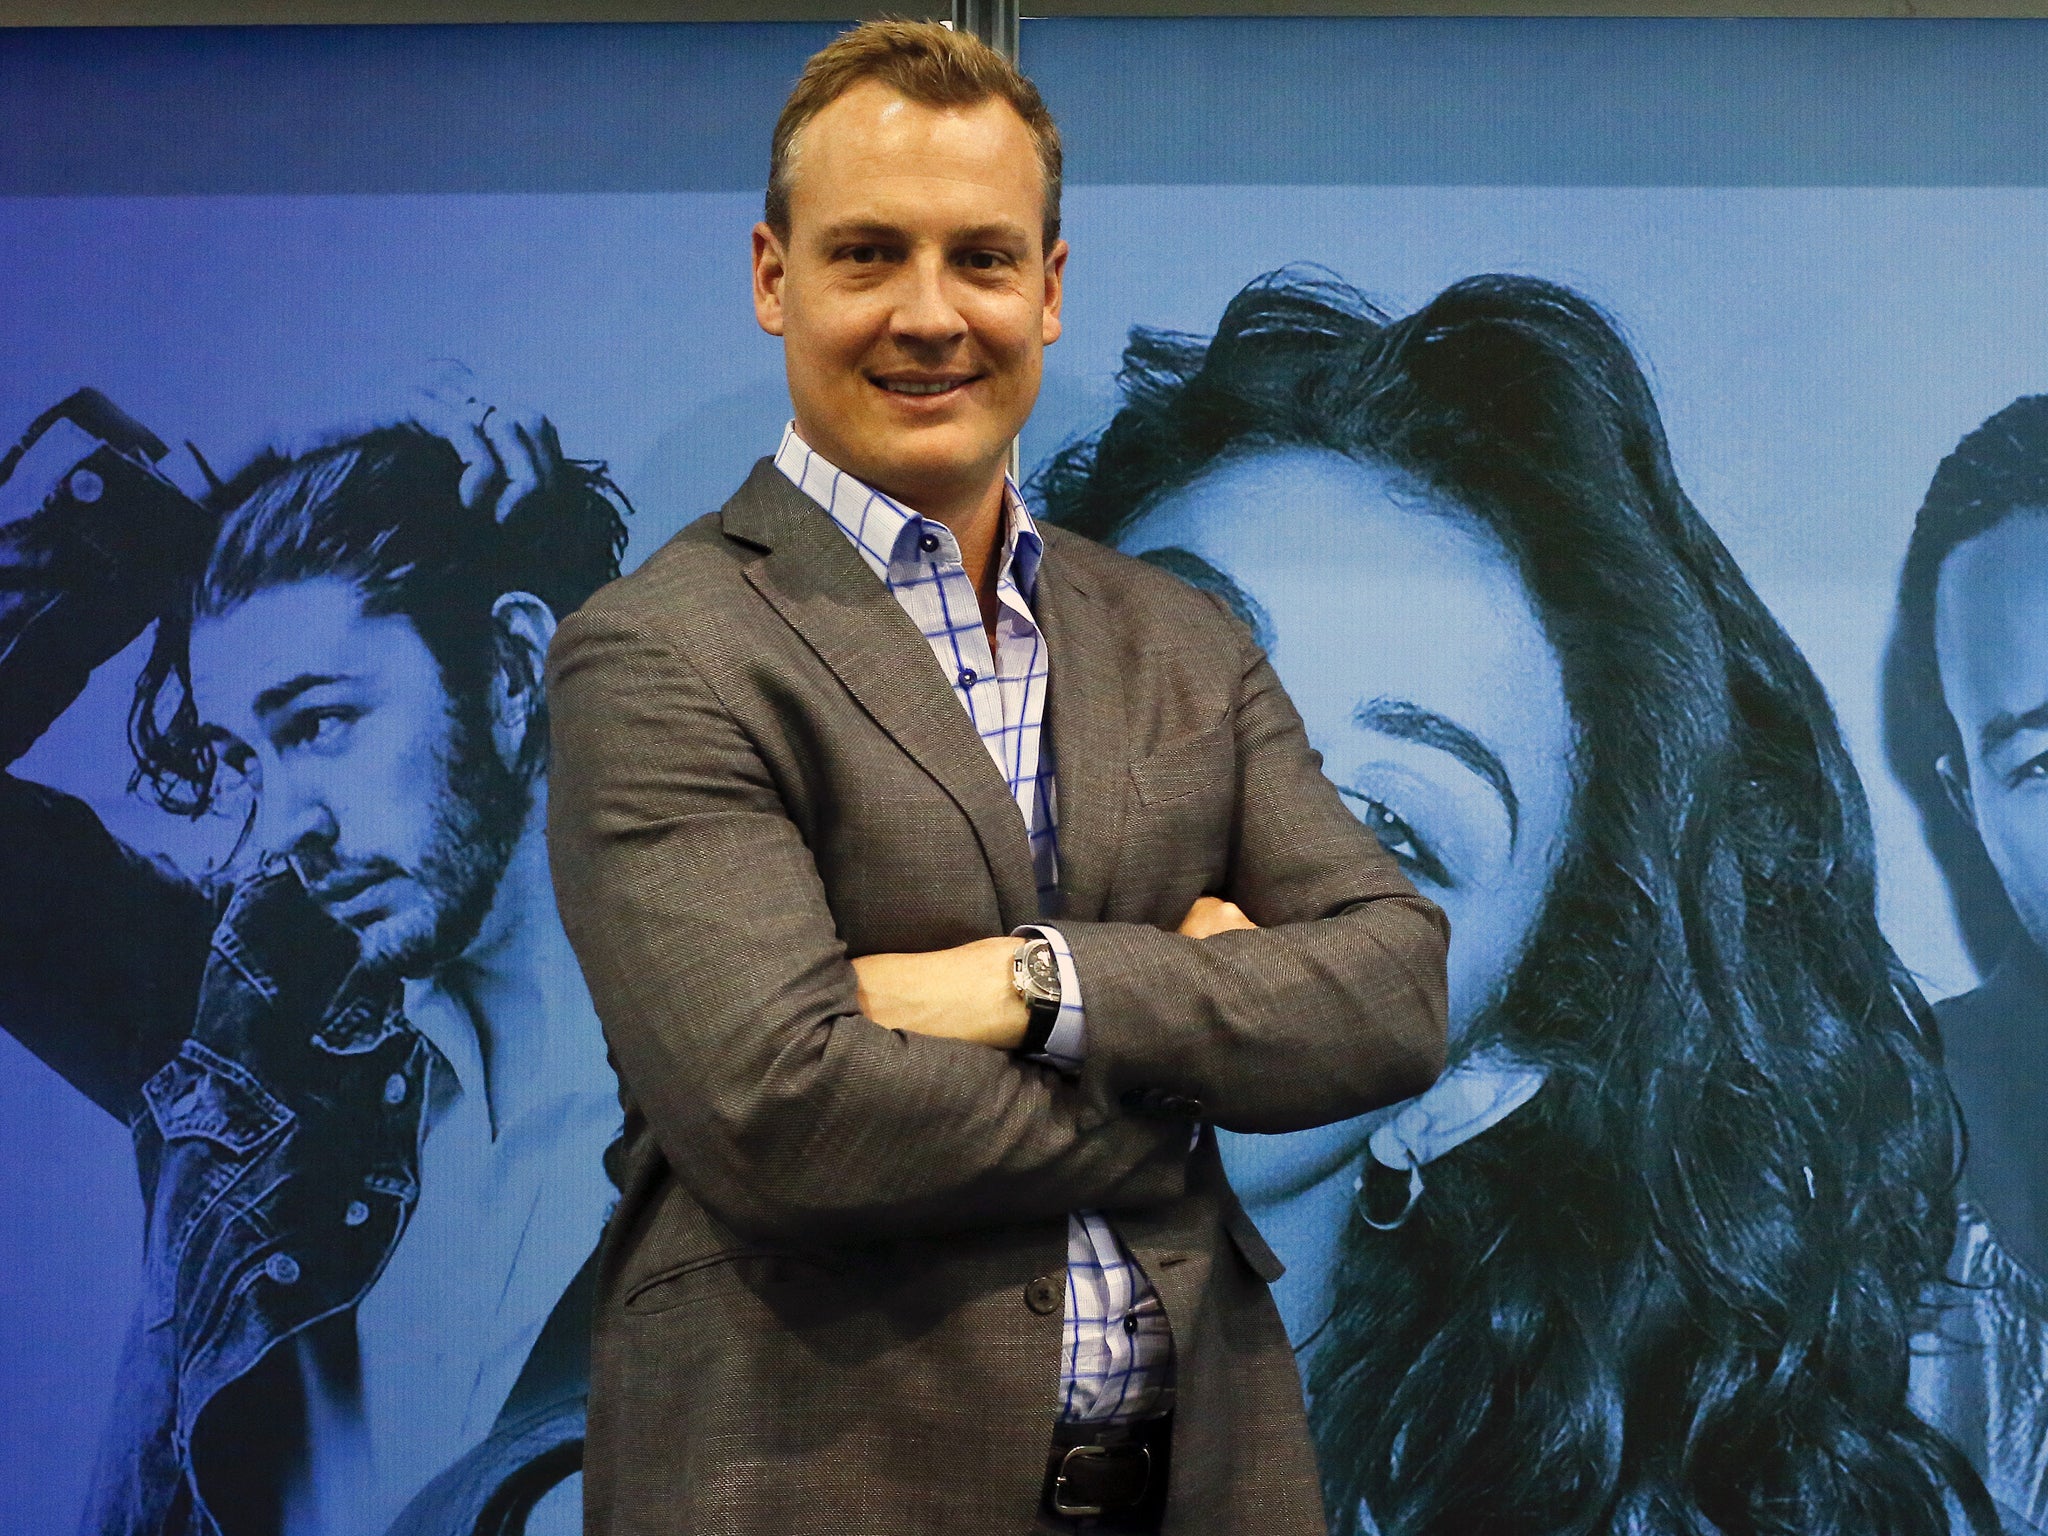 Shazam's Chief Executive Rich Riley poses at the Mobile World Congress in Barcelona March 4, 2015